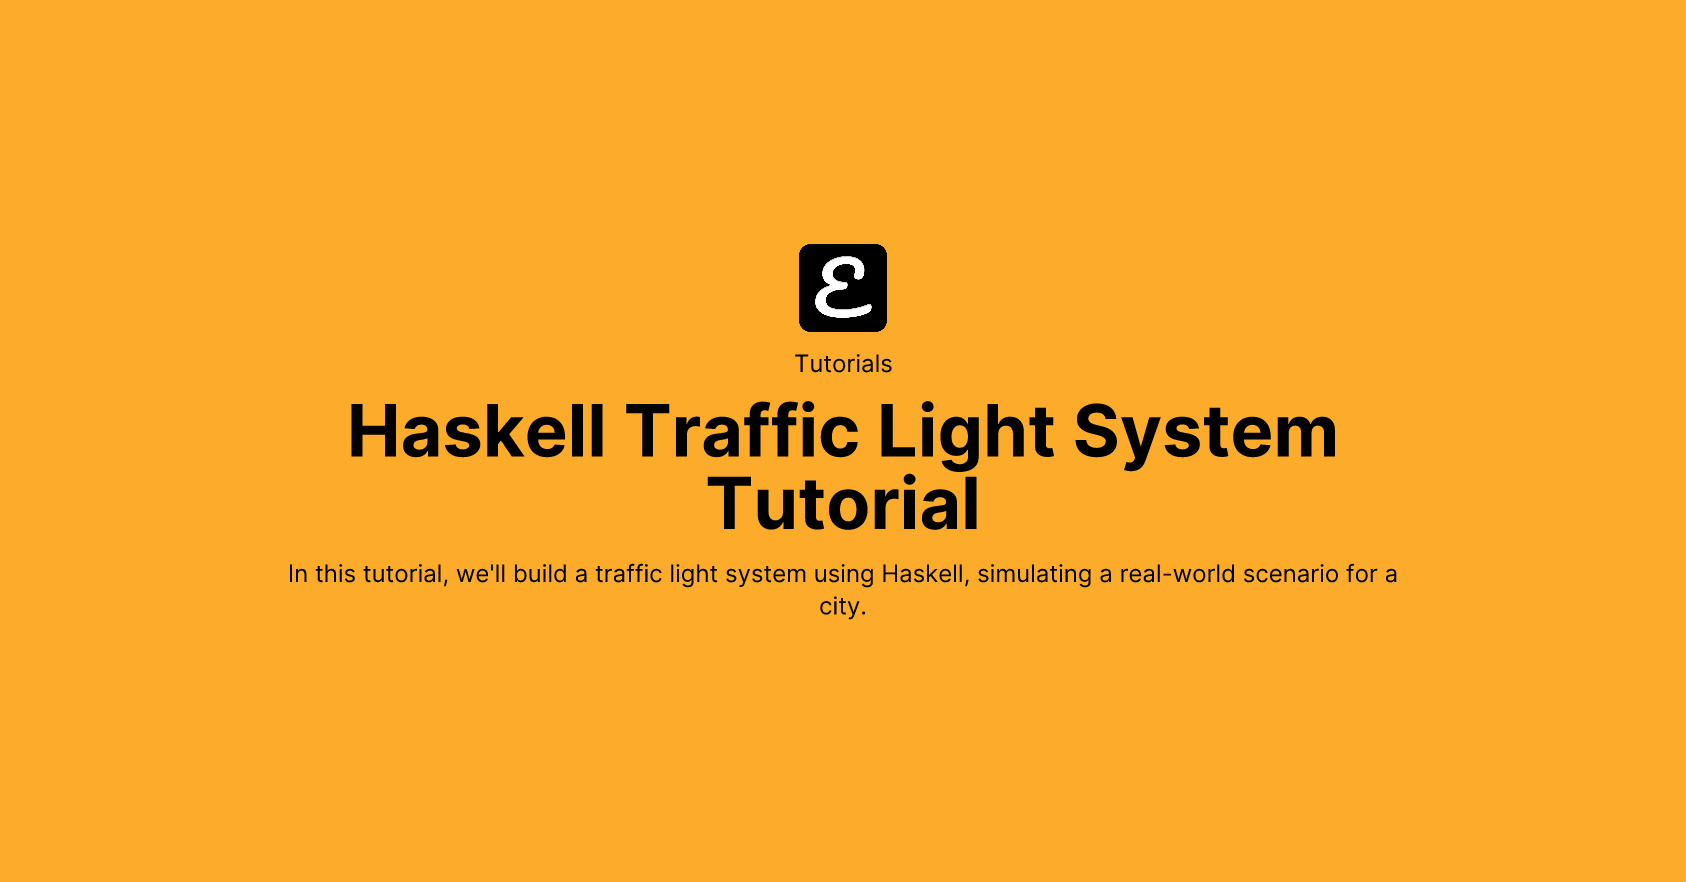 Haskell Traffic Light System Tutorial by Eric David Smith